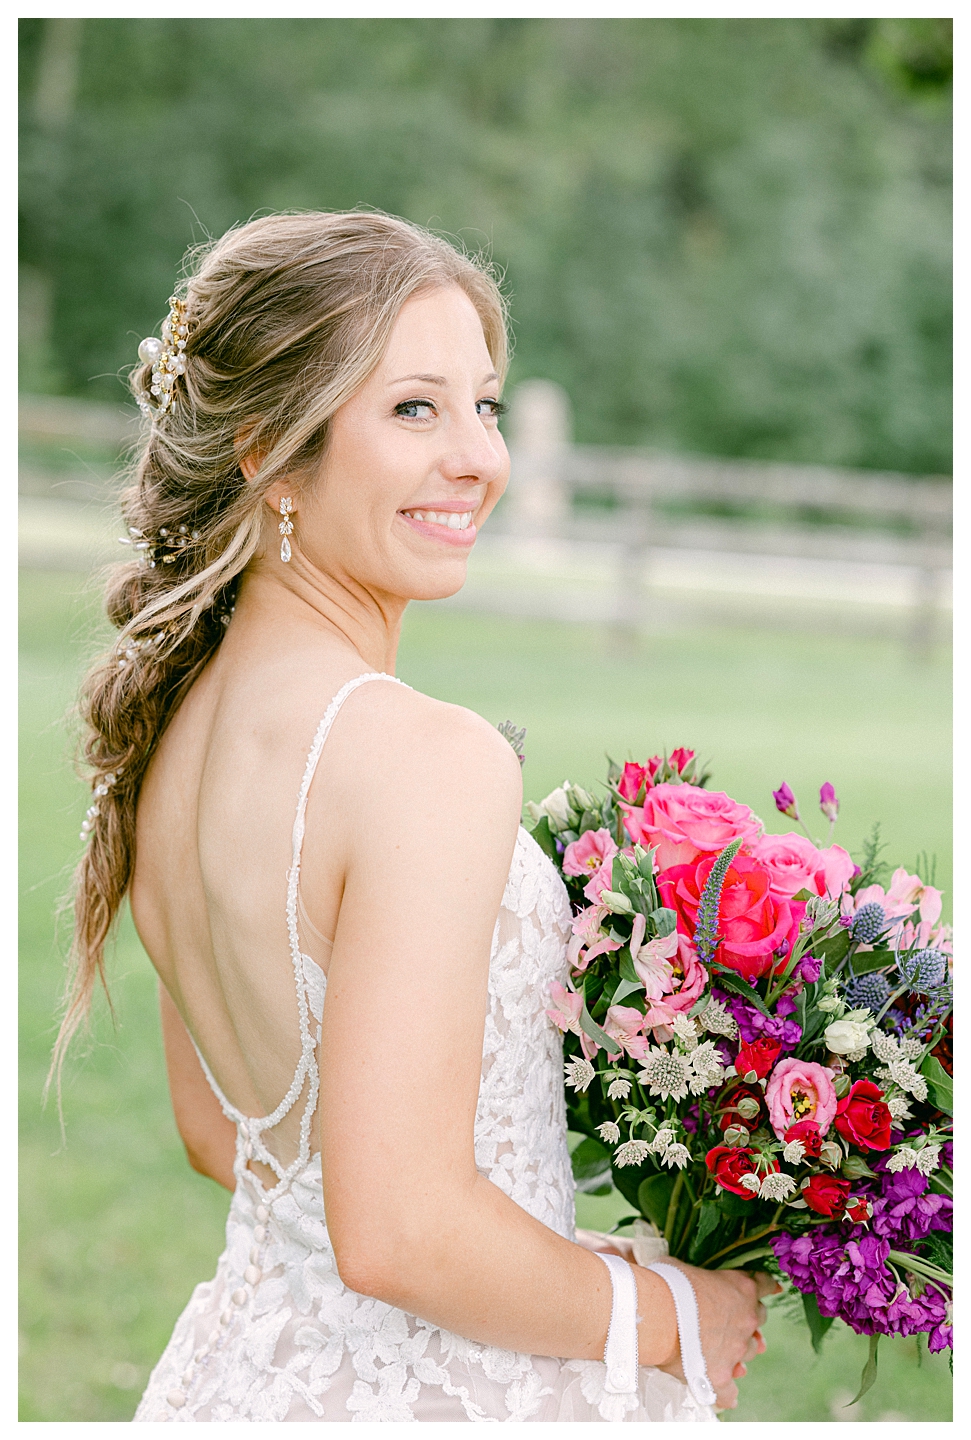 The bride with her flowers at a Mayowood Stone Barn Wedding. Photo by Kayla Lee.